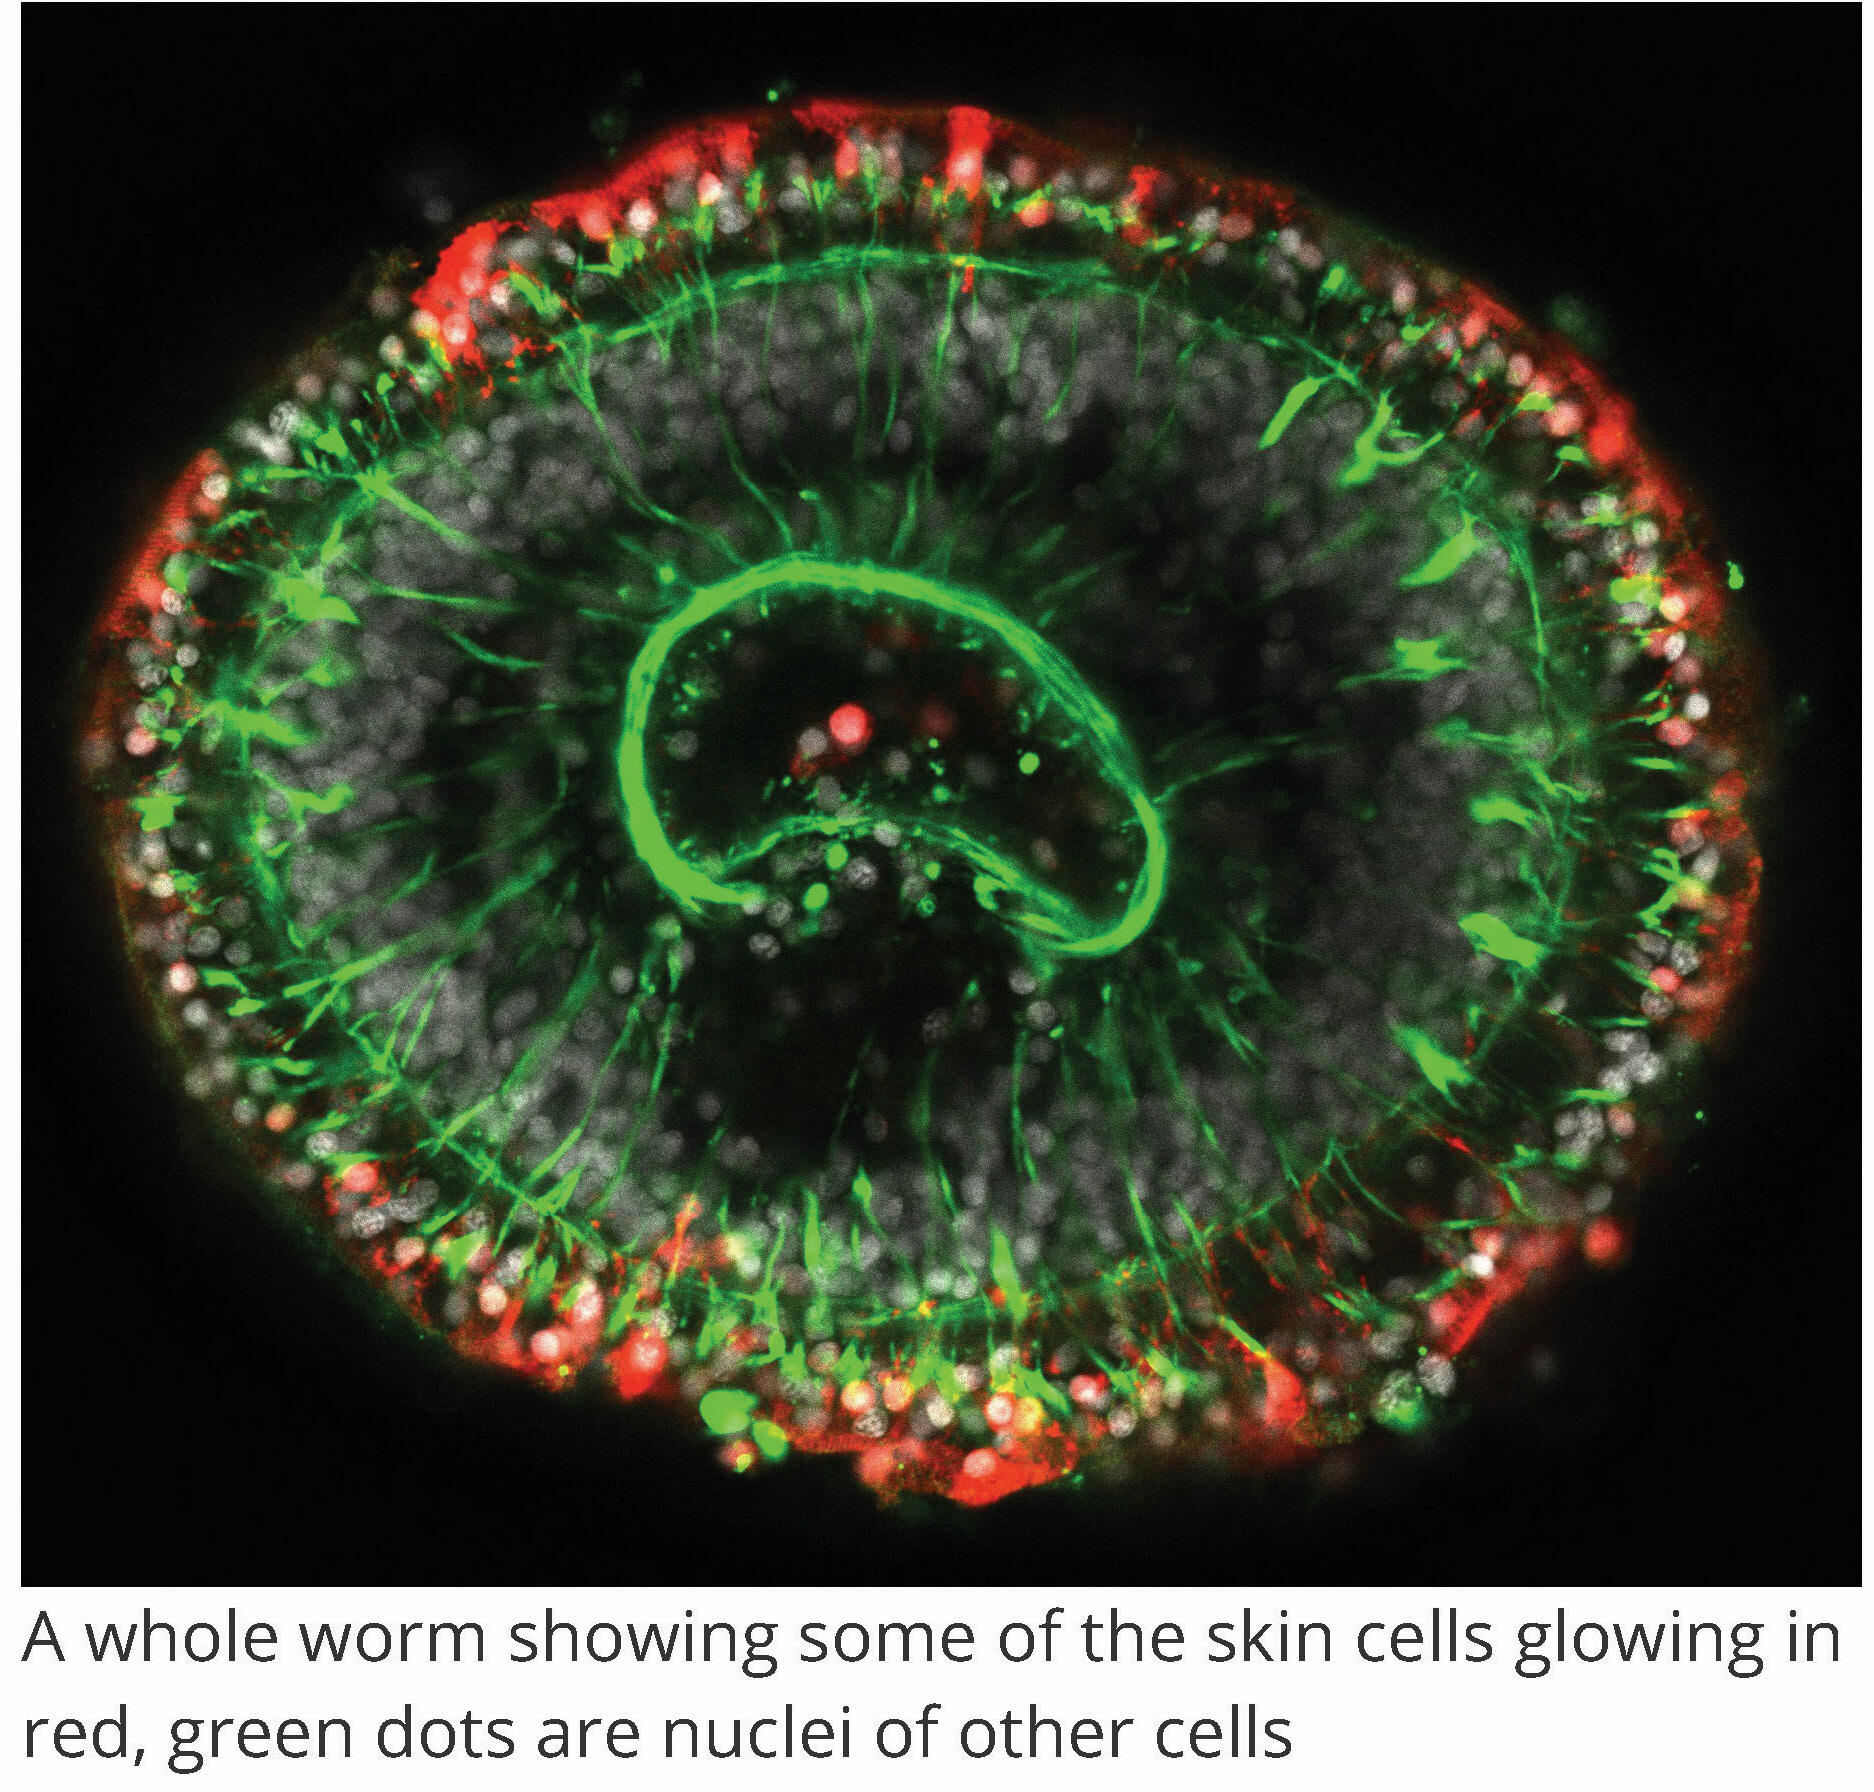 A whole worm showing some of the skin cells glowing in red, green dots are nuclei of other cells. Image by Lorenzo Ricci